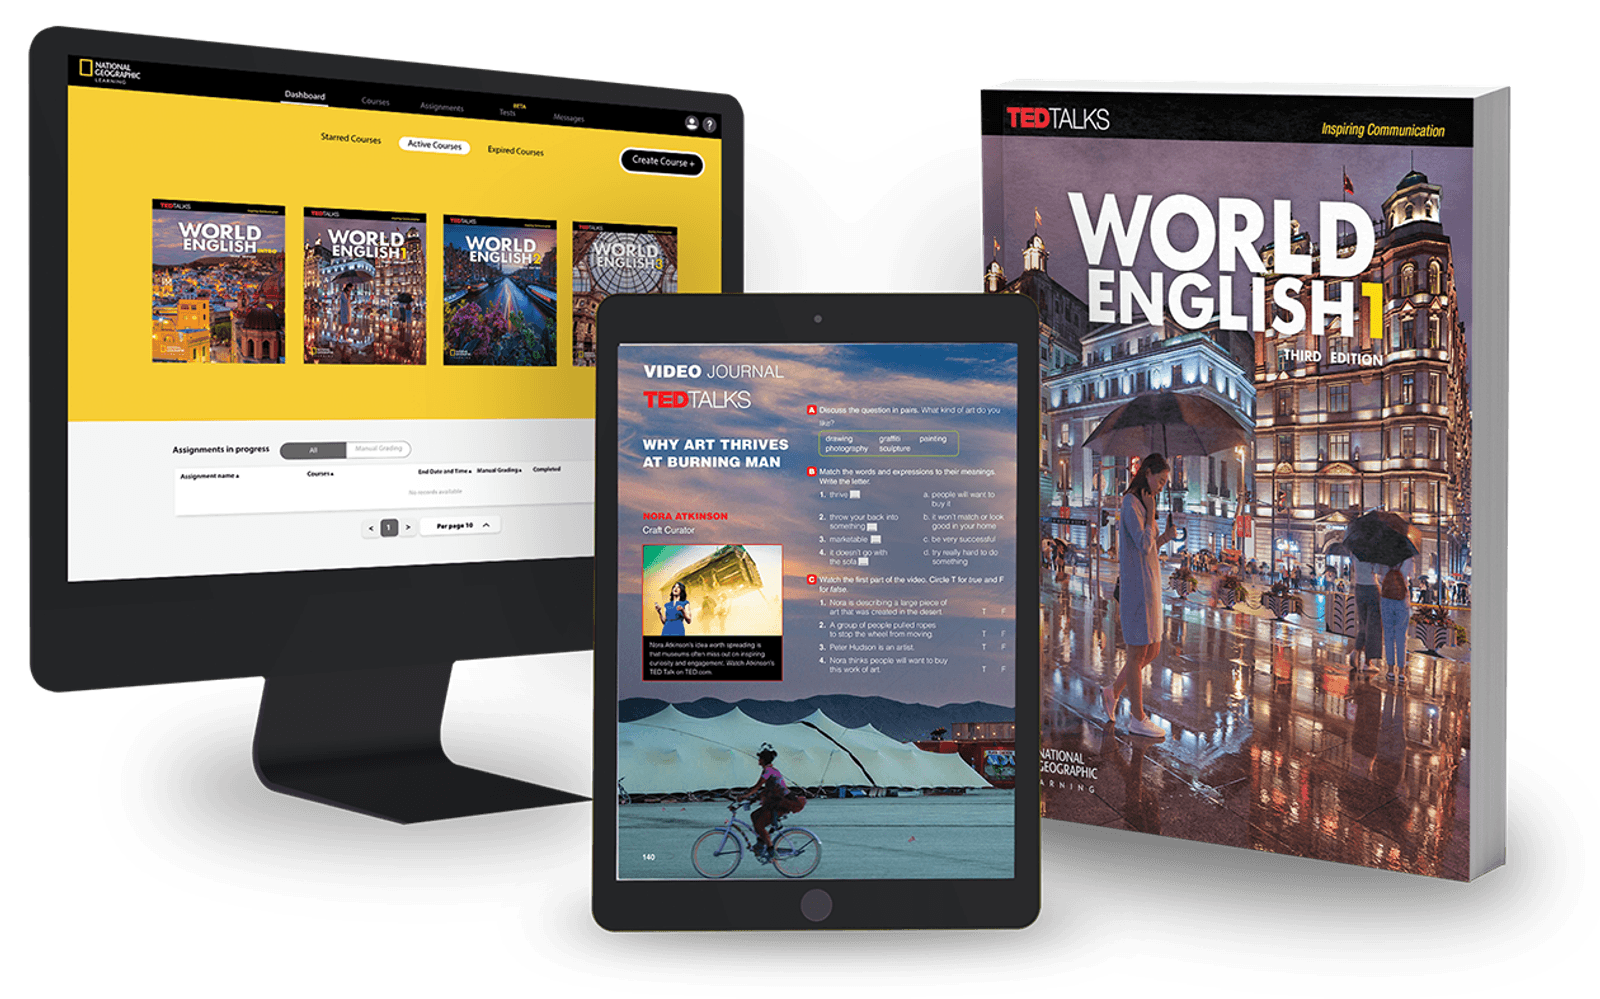 Adult Program World English collage with Book and Spark platform in devices